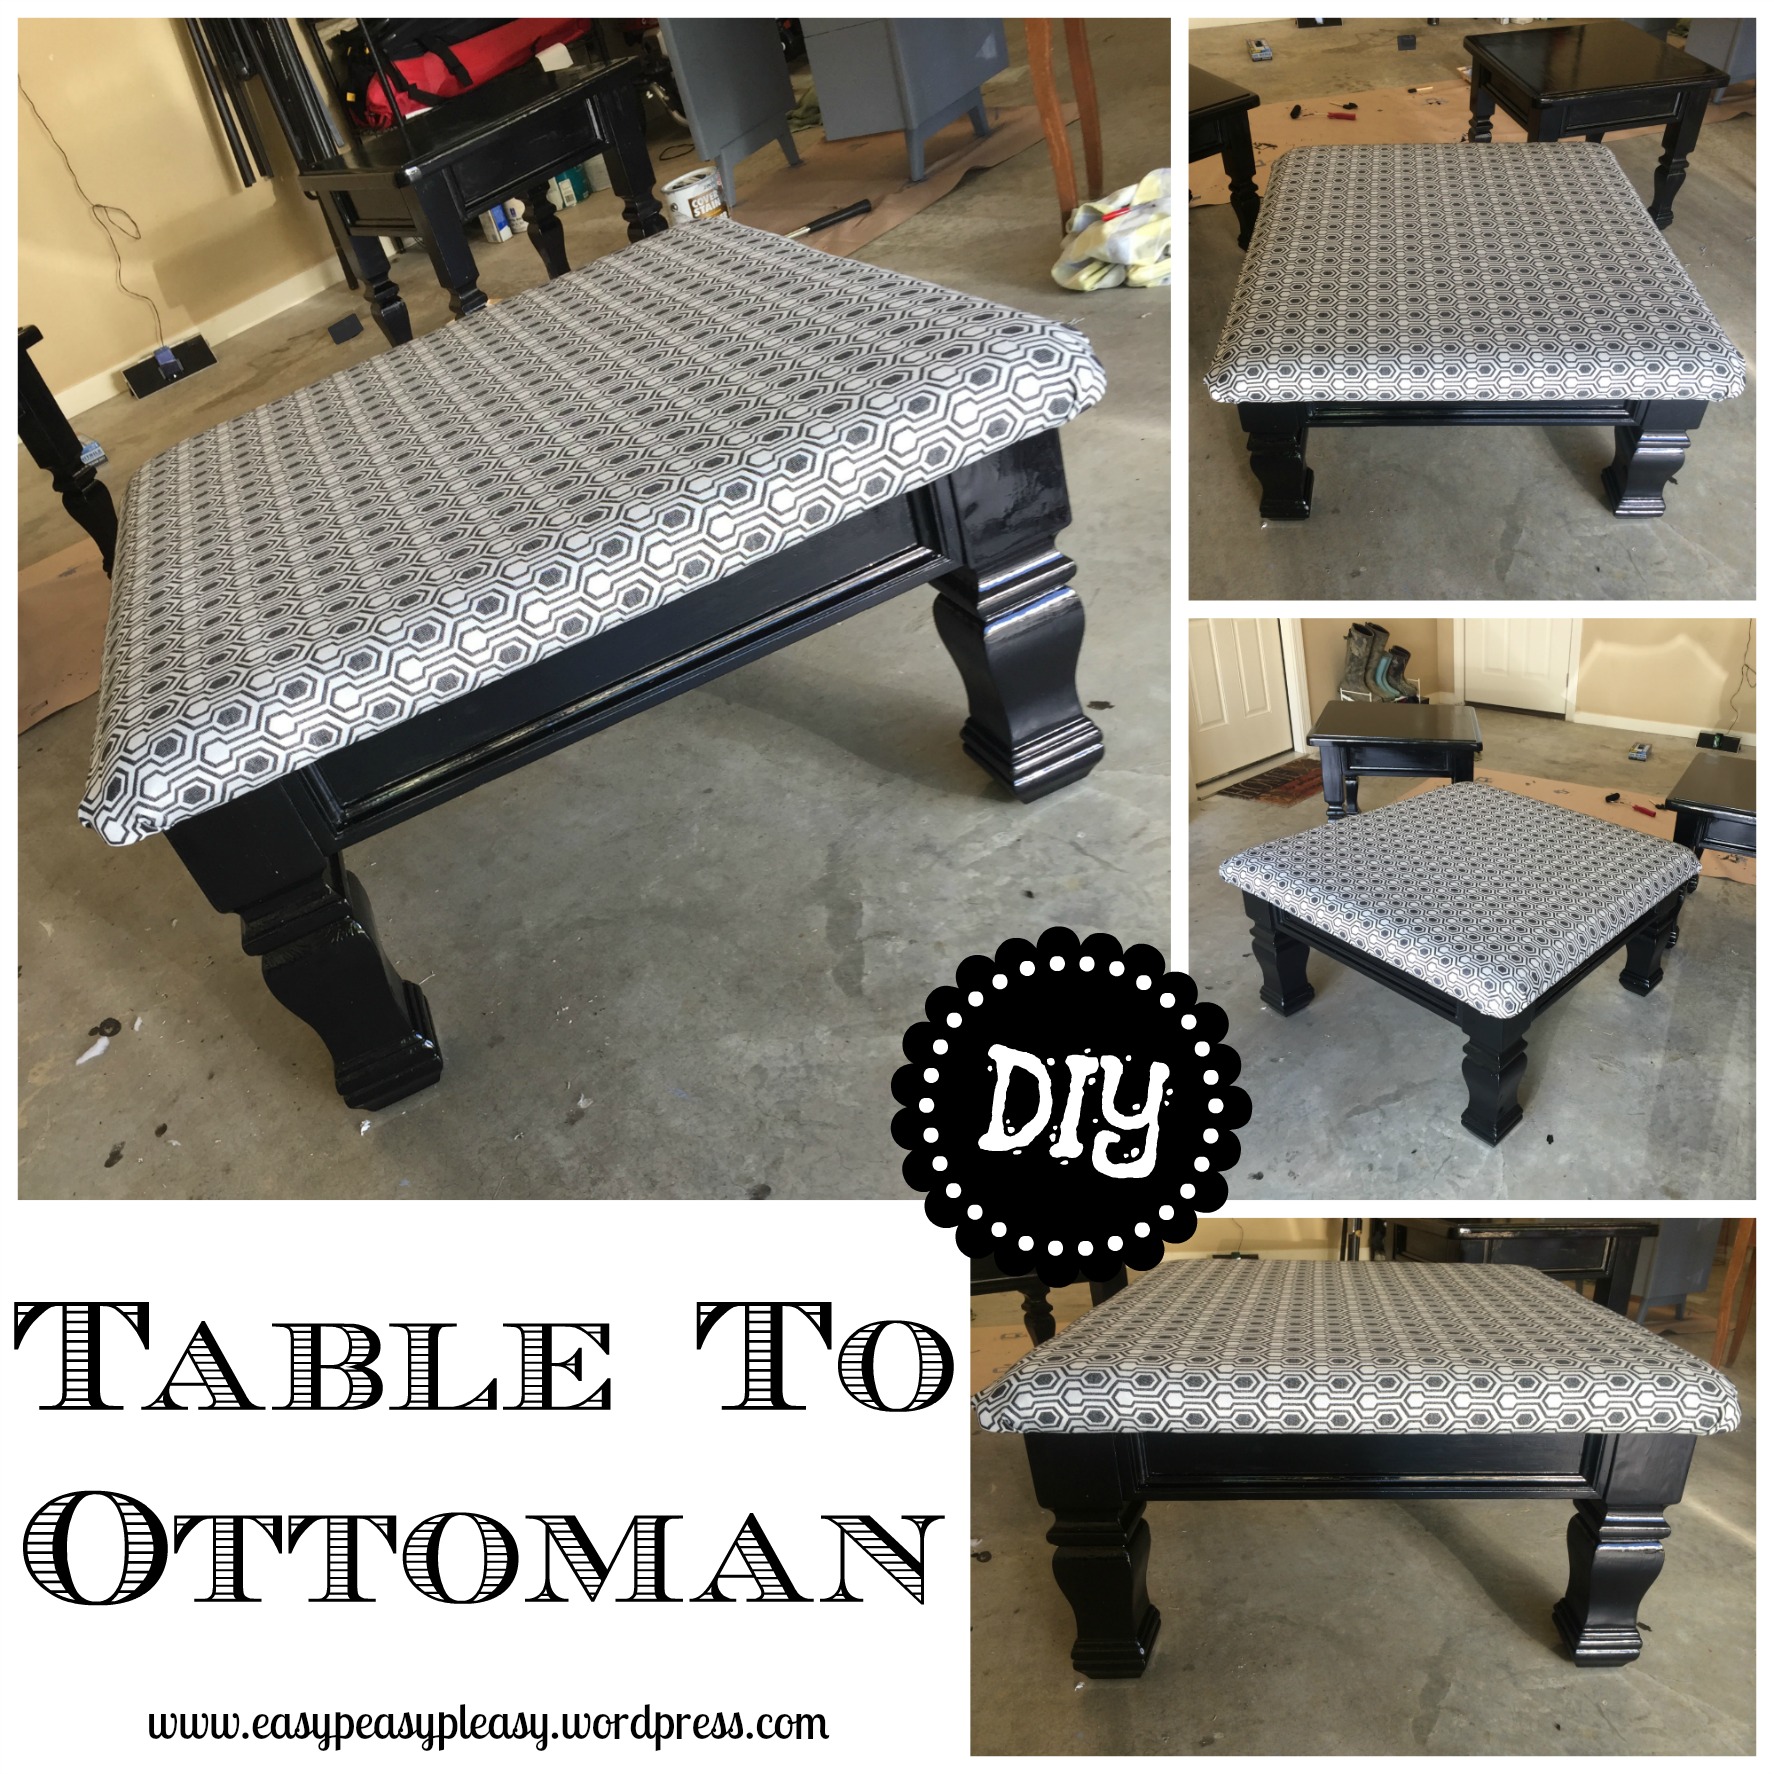 Quick and easy table to ottoman diy project.